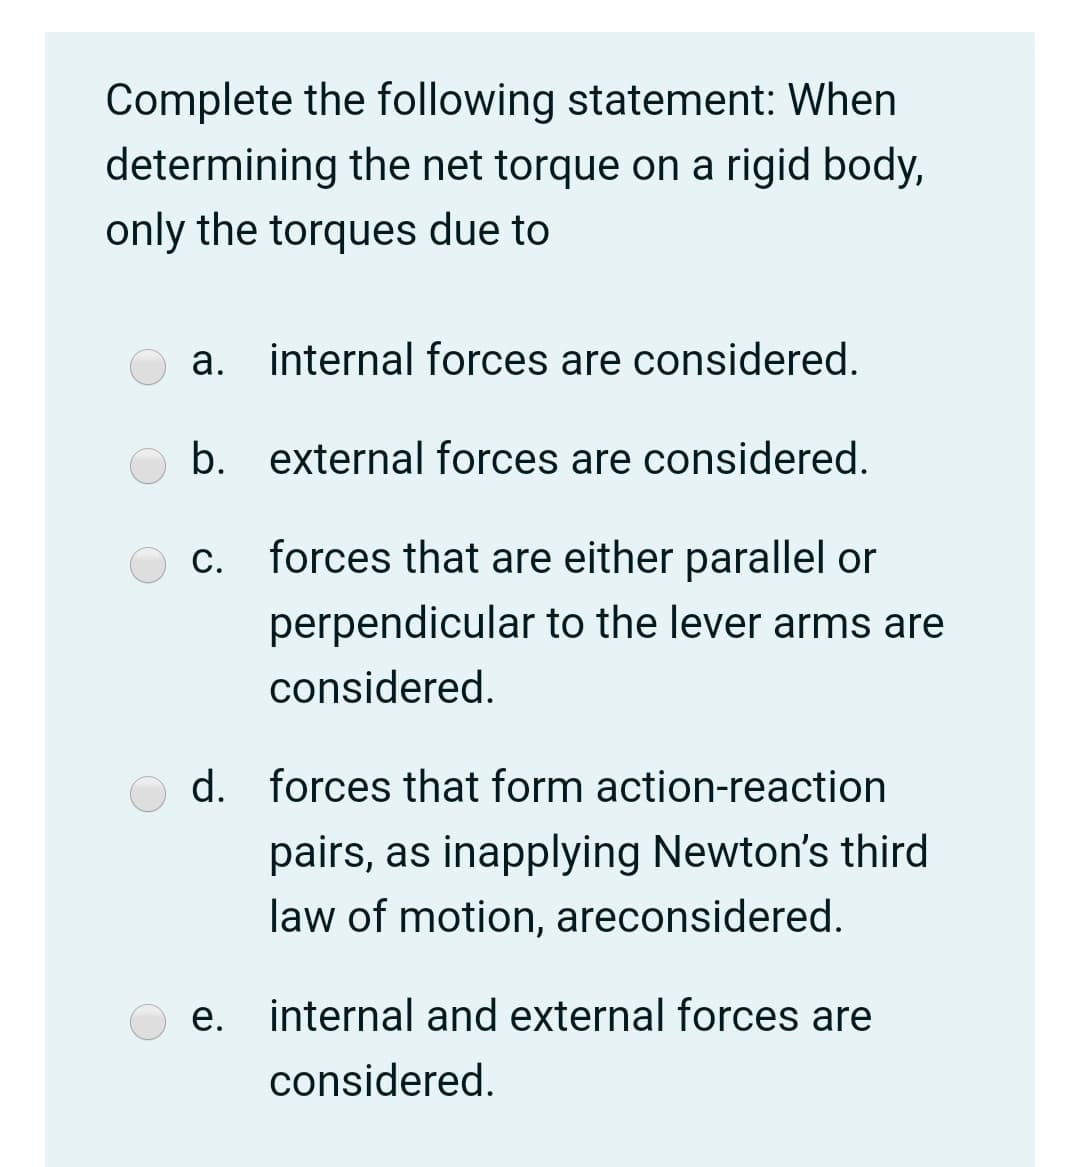 Complete the following statement: When
determining the net torque on a rigid body,
only the torques due to
a. internal forces are considered.
b.
external forces are considered.
C.
forces that are either parallel or
perpendicular to the lever arms are
considered.
d. forces that form action-reaction
pairs, as inapplying Newton's third
law of motion, areconsidered.
e. internal and external forces are
е.
considered.
